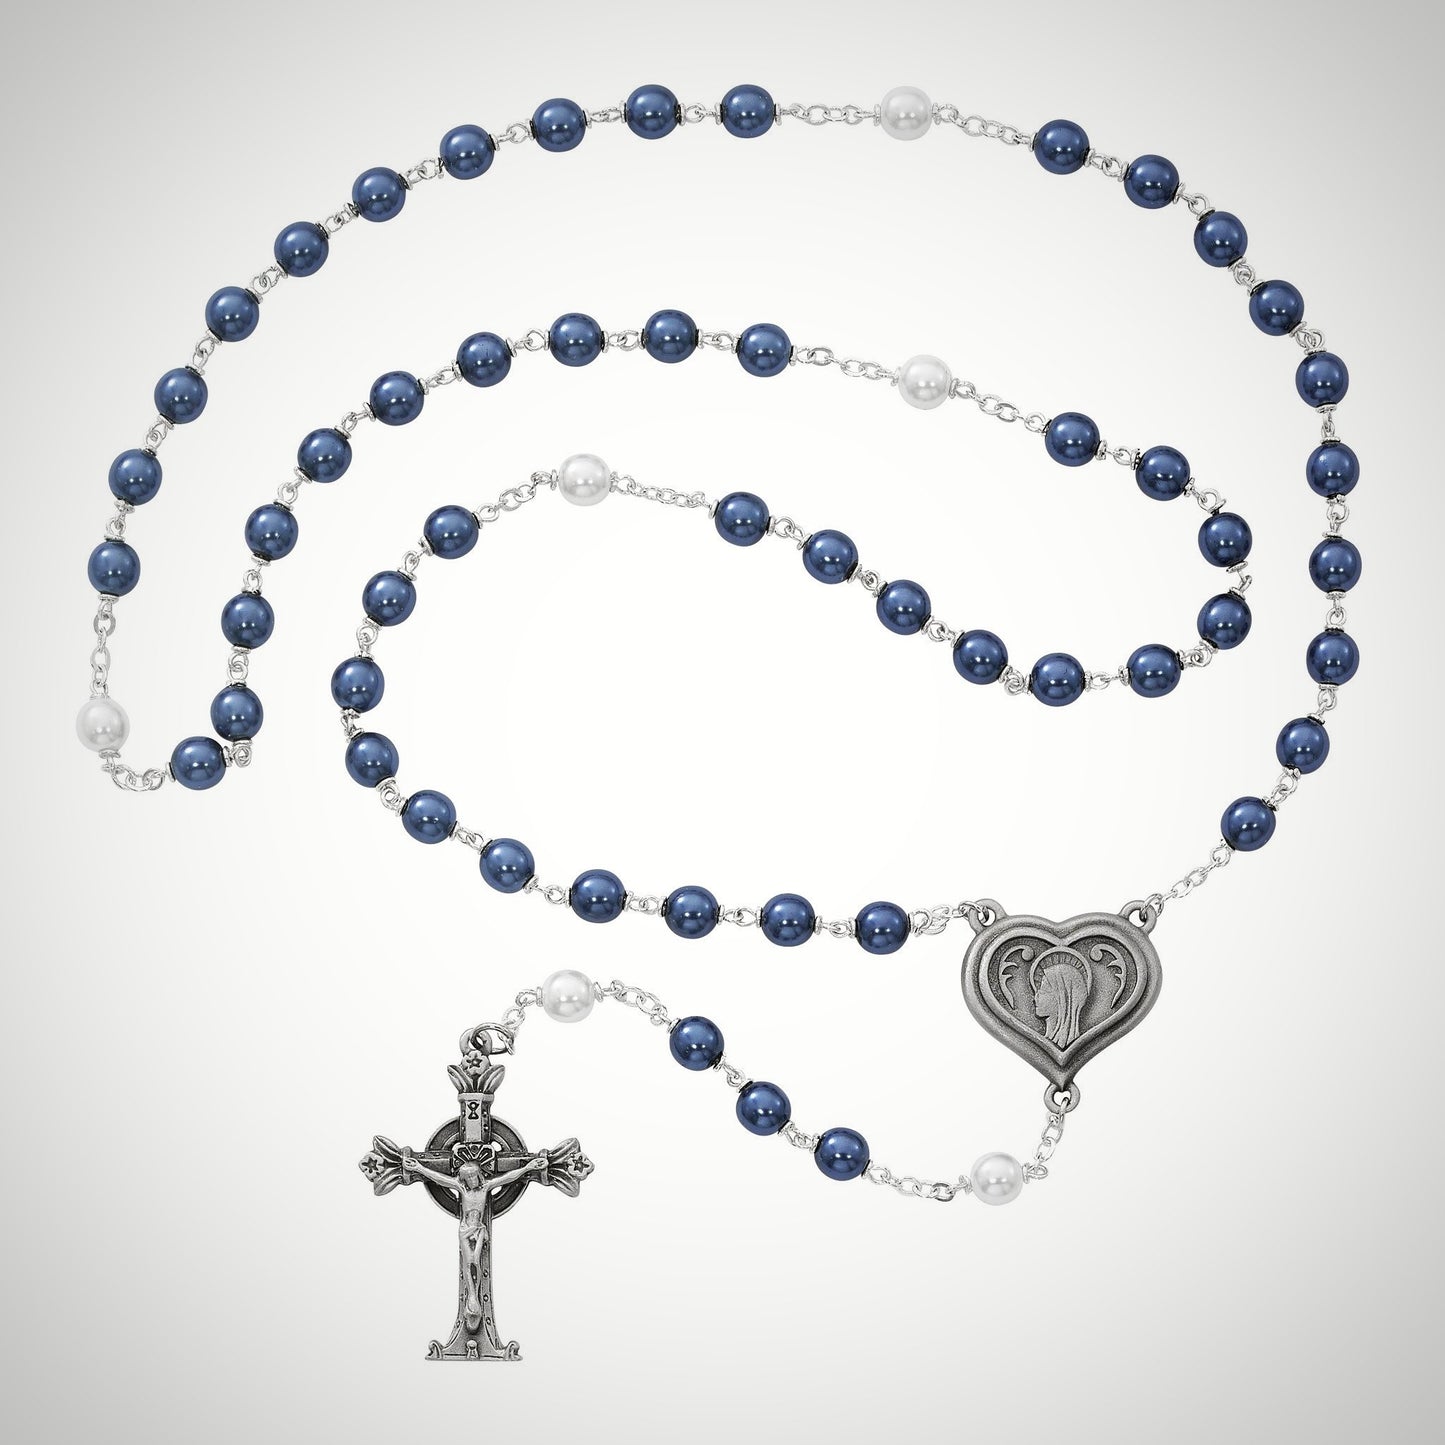 Blue and Pearlized Glass Lourdes Water Rosary Boxed